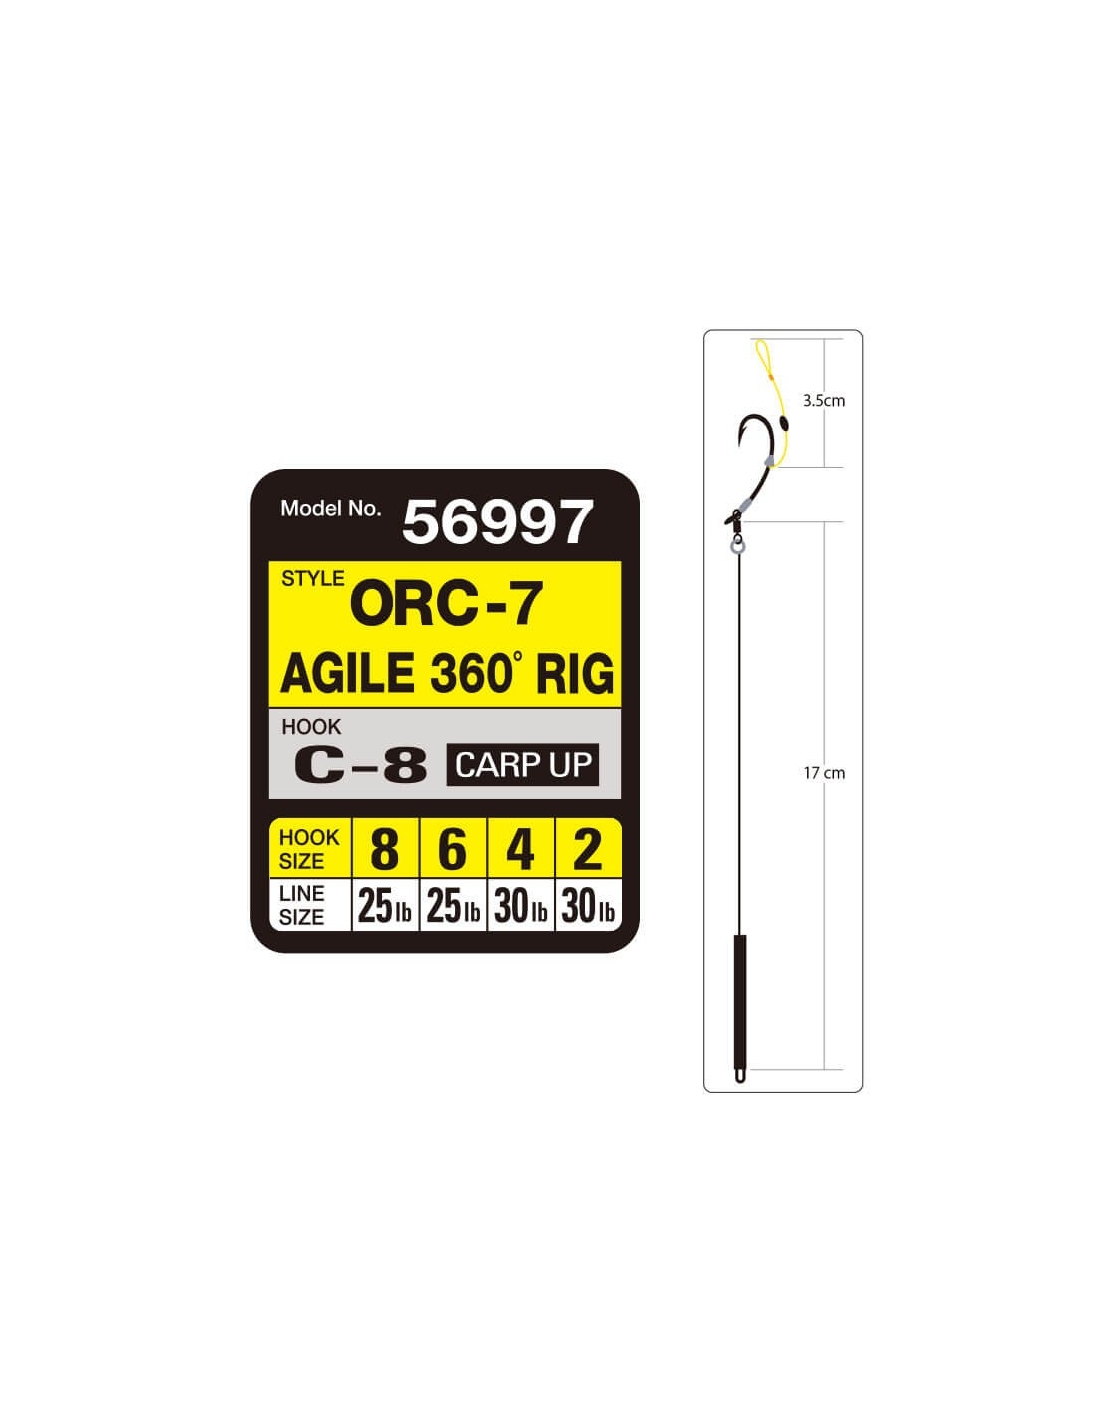 Anzuelo Owner Agile 360 Rig 56997/ORC-7